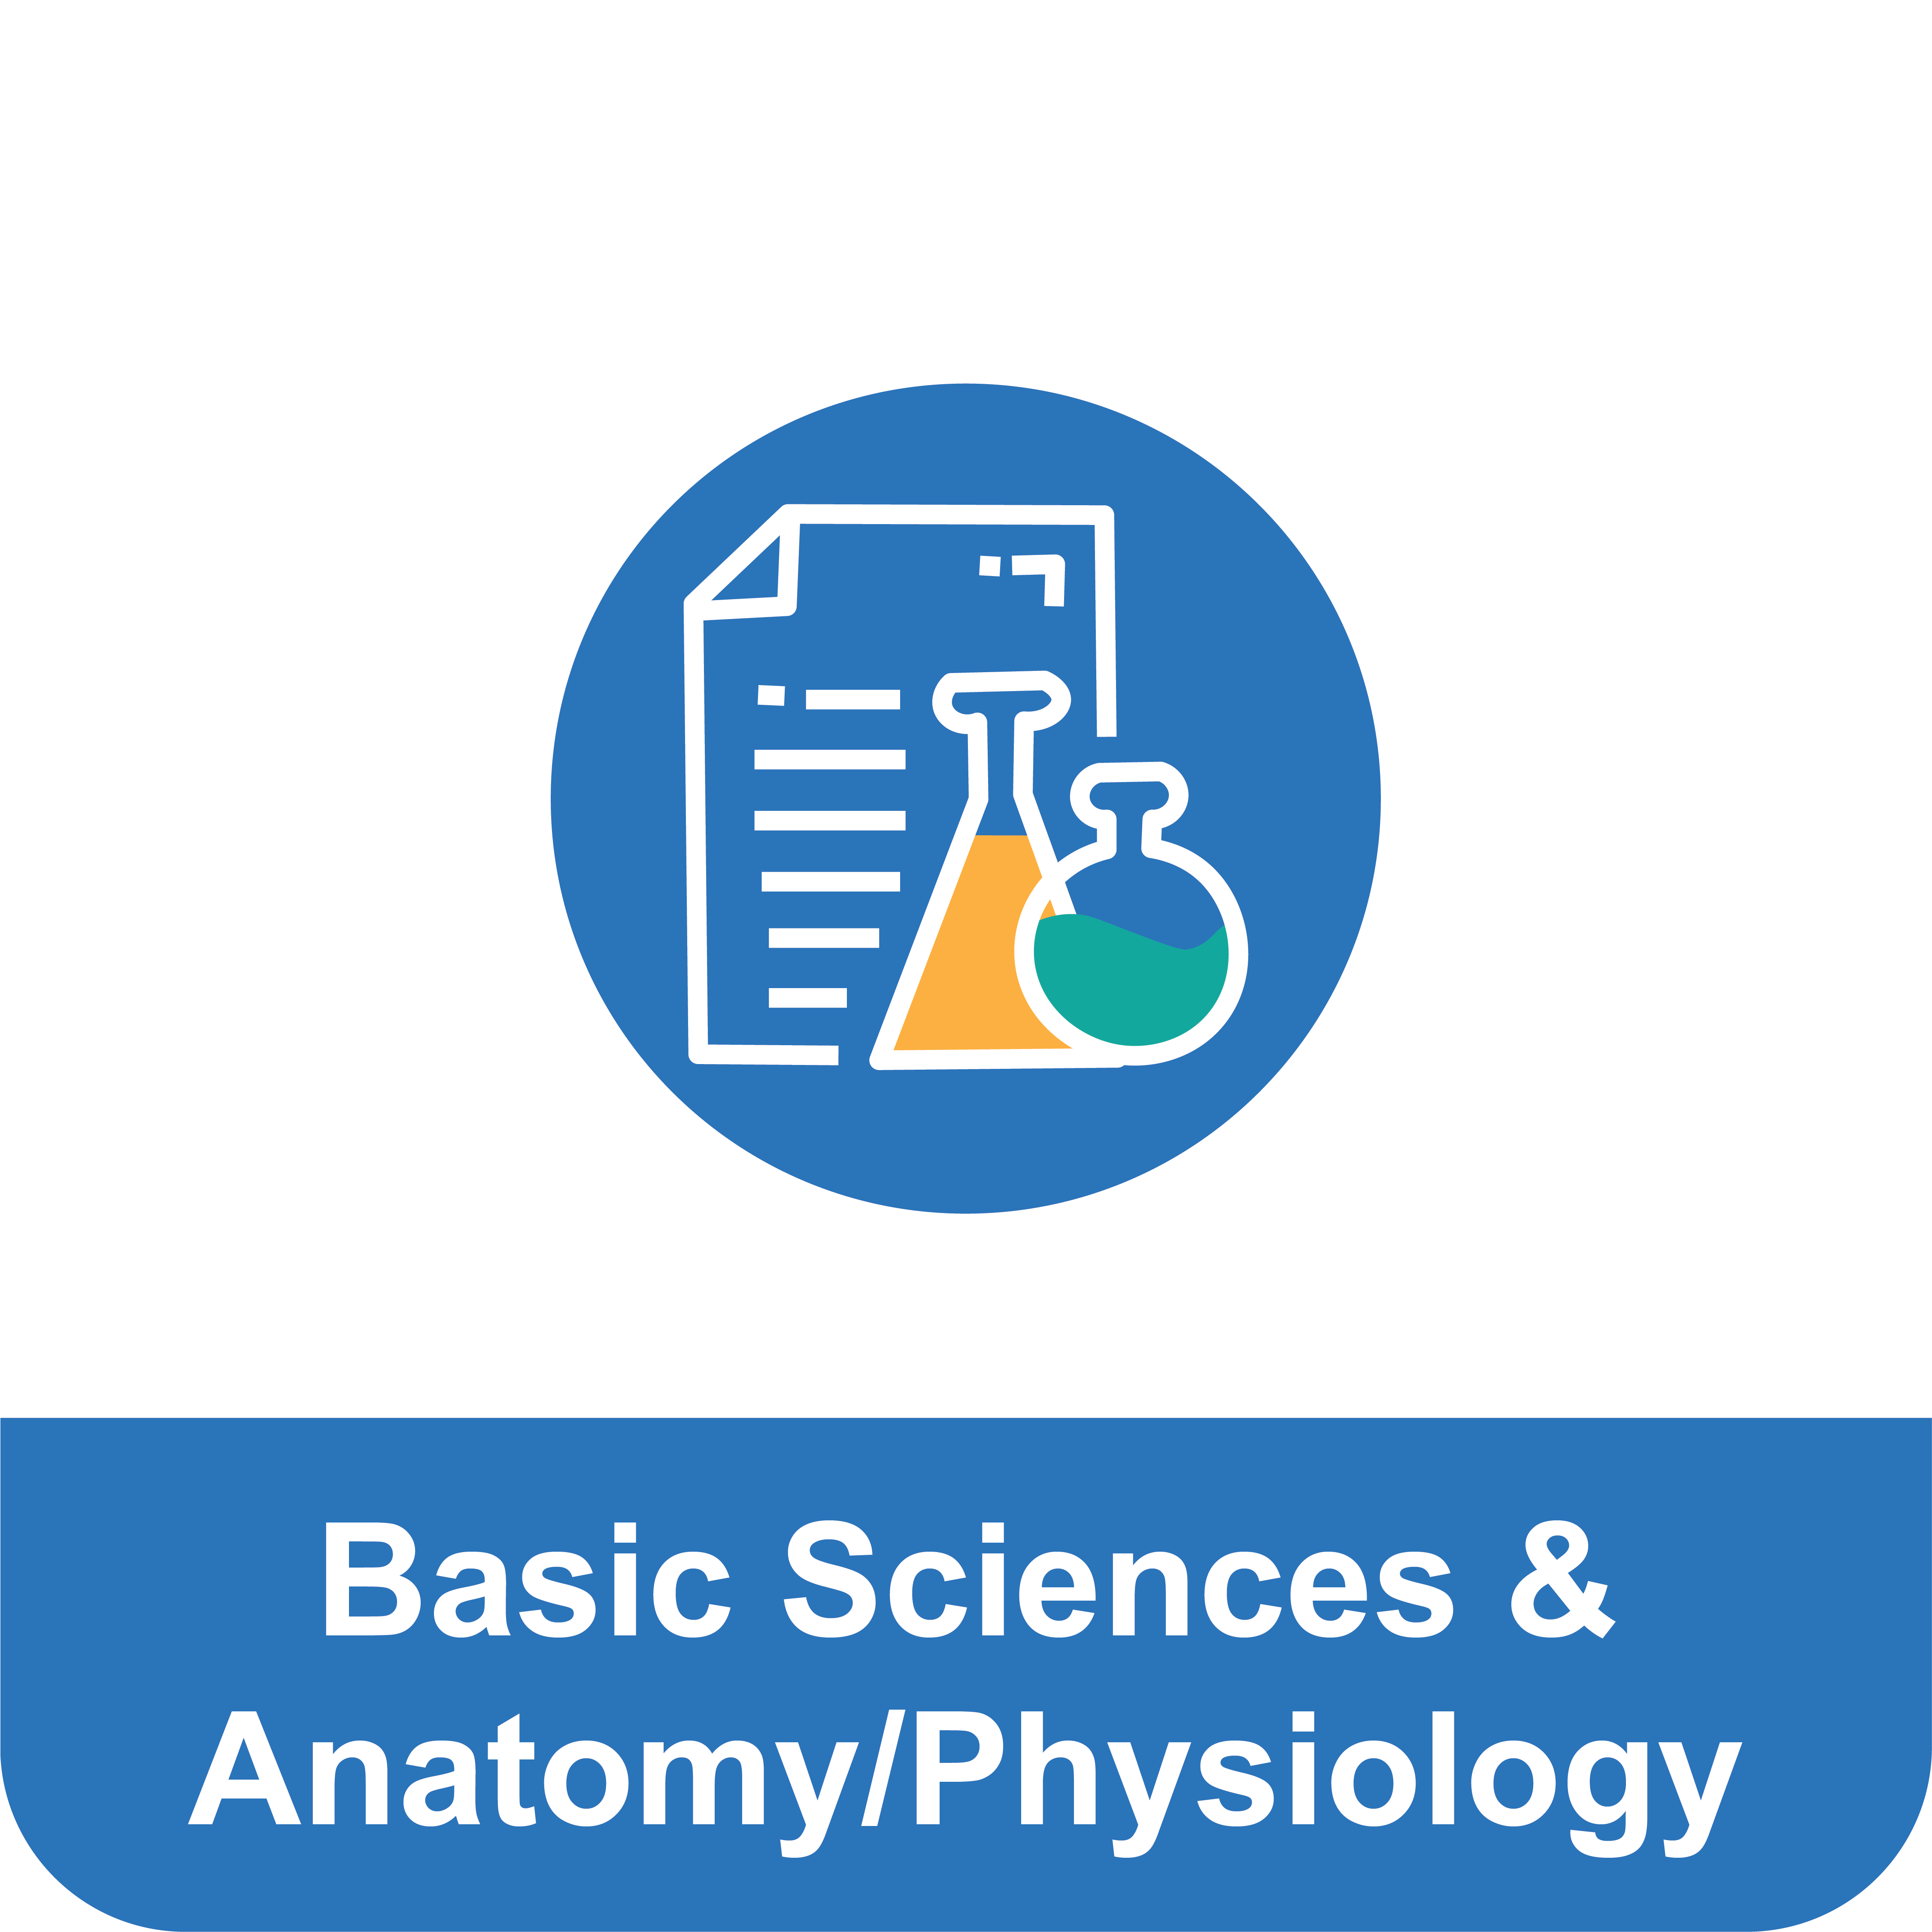 Tile that reads "Basic Sciences & Anatomy/Physiology" under an icon of two beakers of liquid in front of a document.